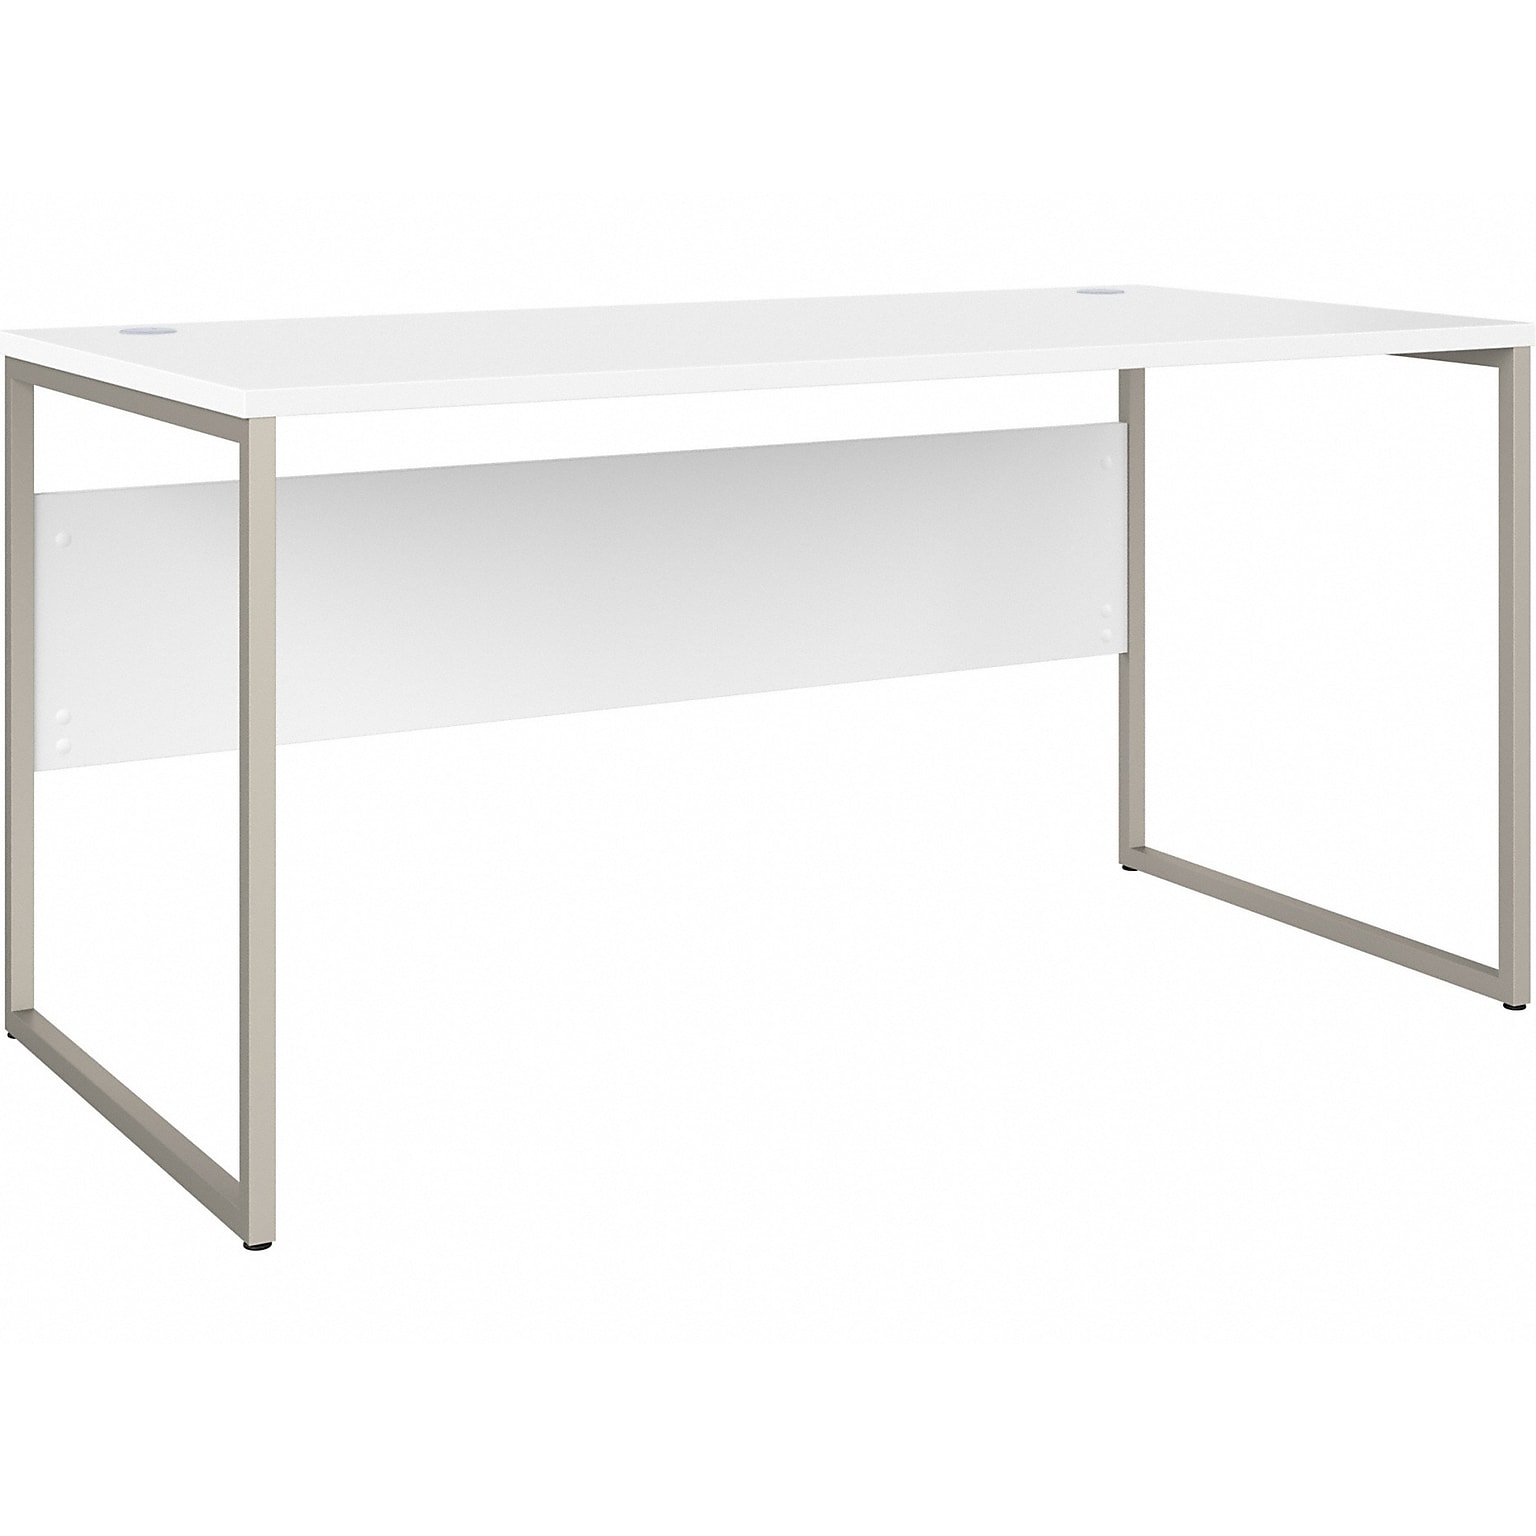 Bush Business Furniture Hybrid 60W Computer Table Desk with Metal Legs, White (HYD360WH)